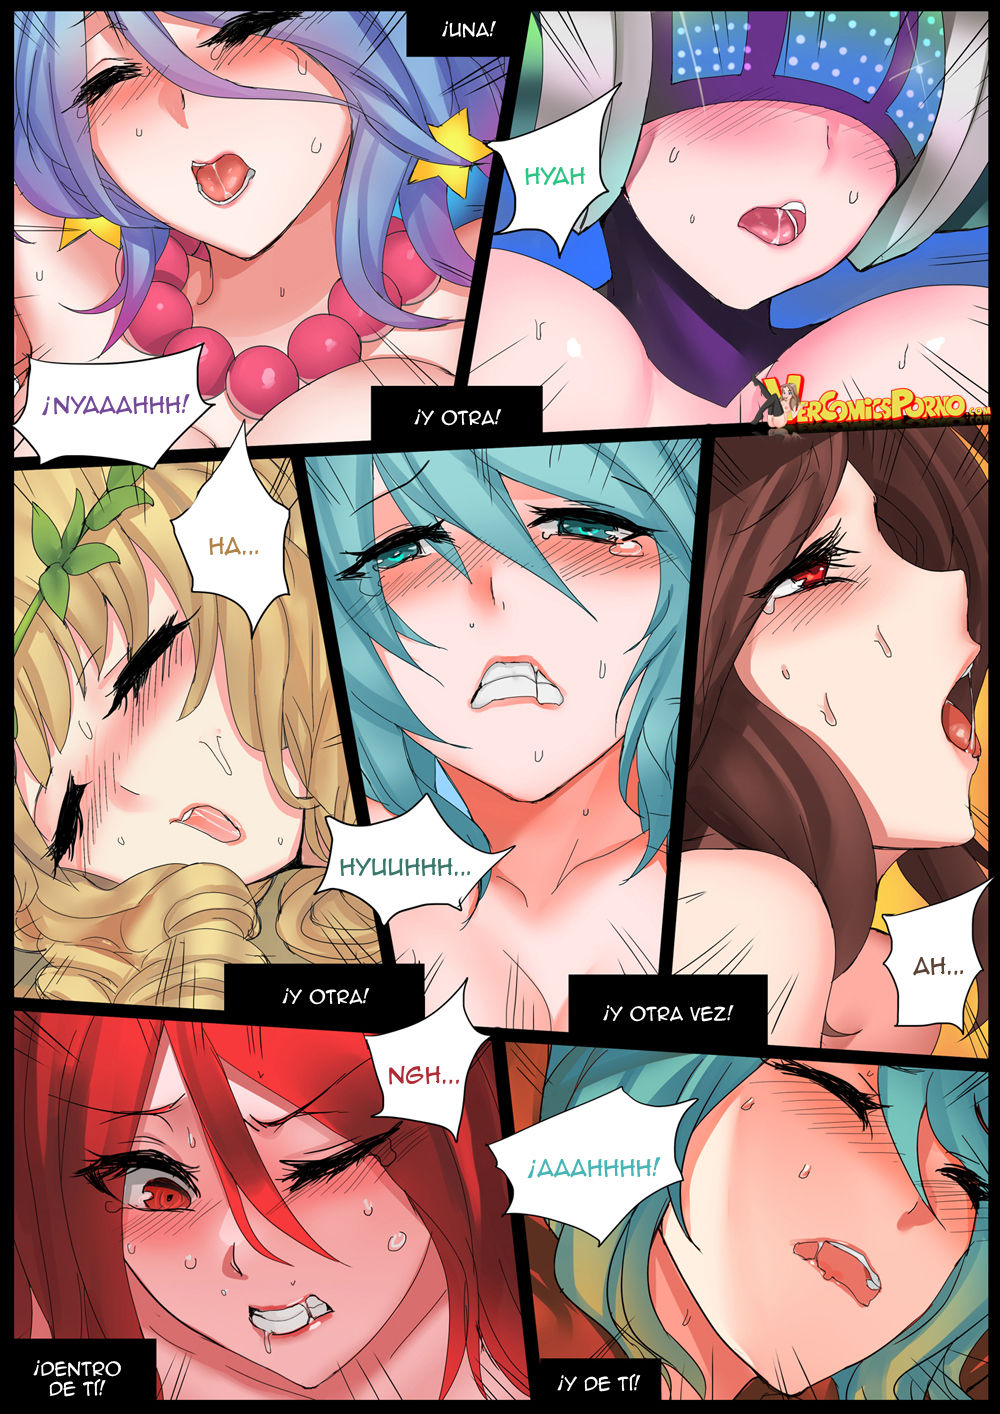 Read Pd Sona S Home Second Part League Of Legends Spanish Hentai